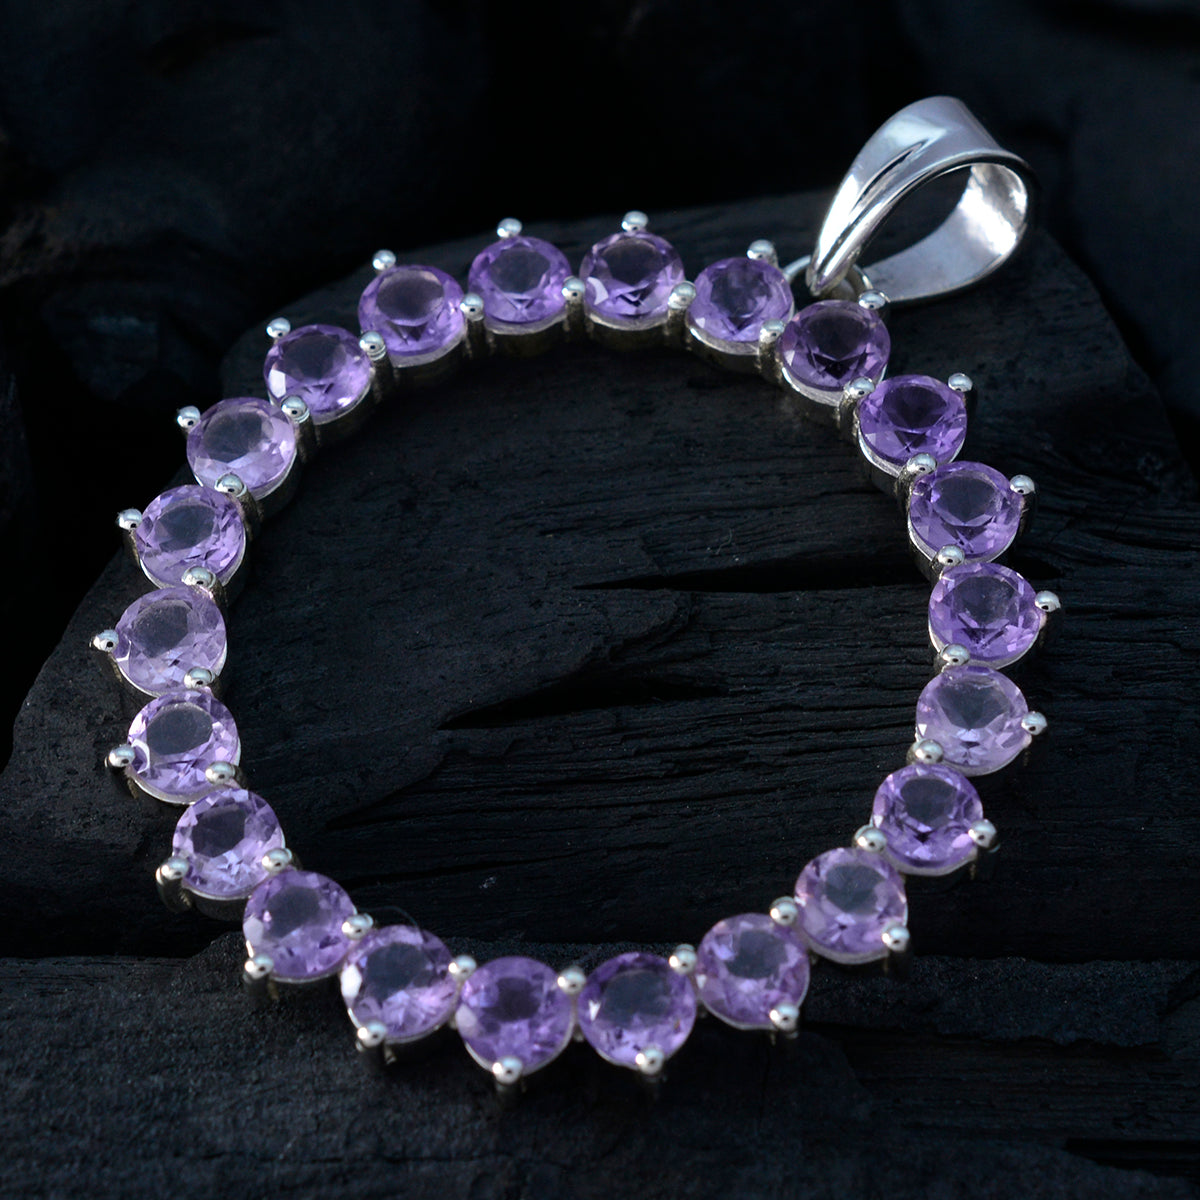 Riyo Lovely Gems Round Faceted Purple Amethyst Silver Pendant Gift For Engagement